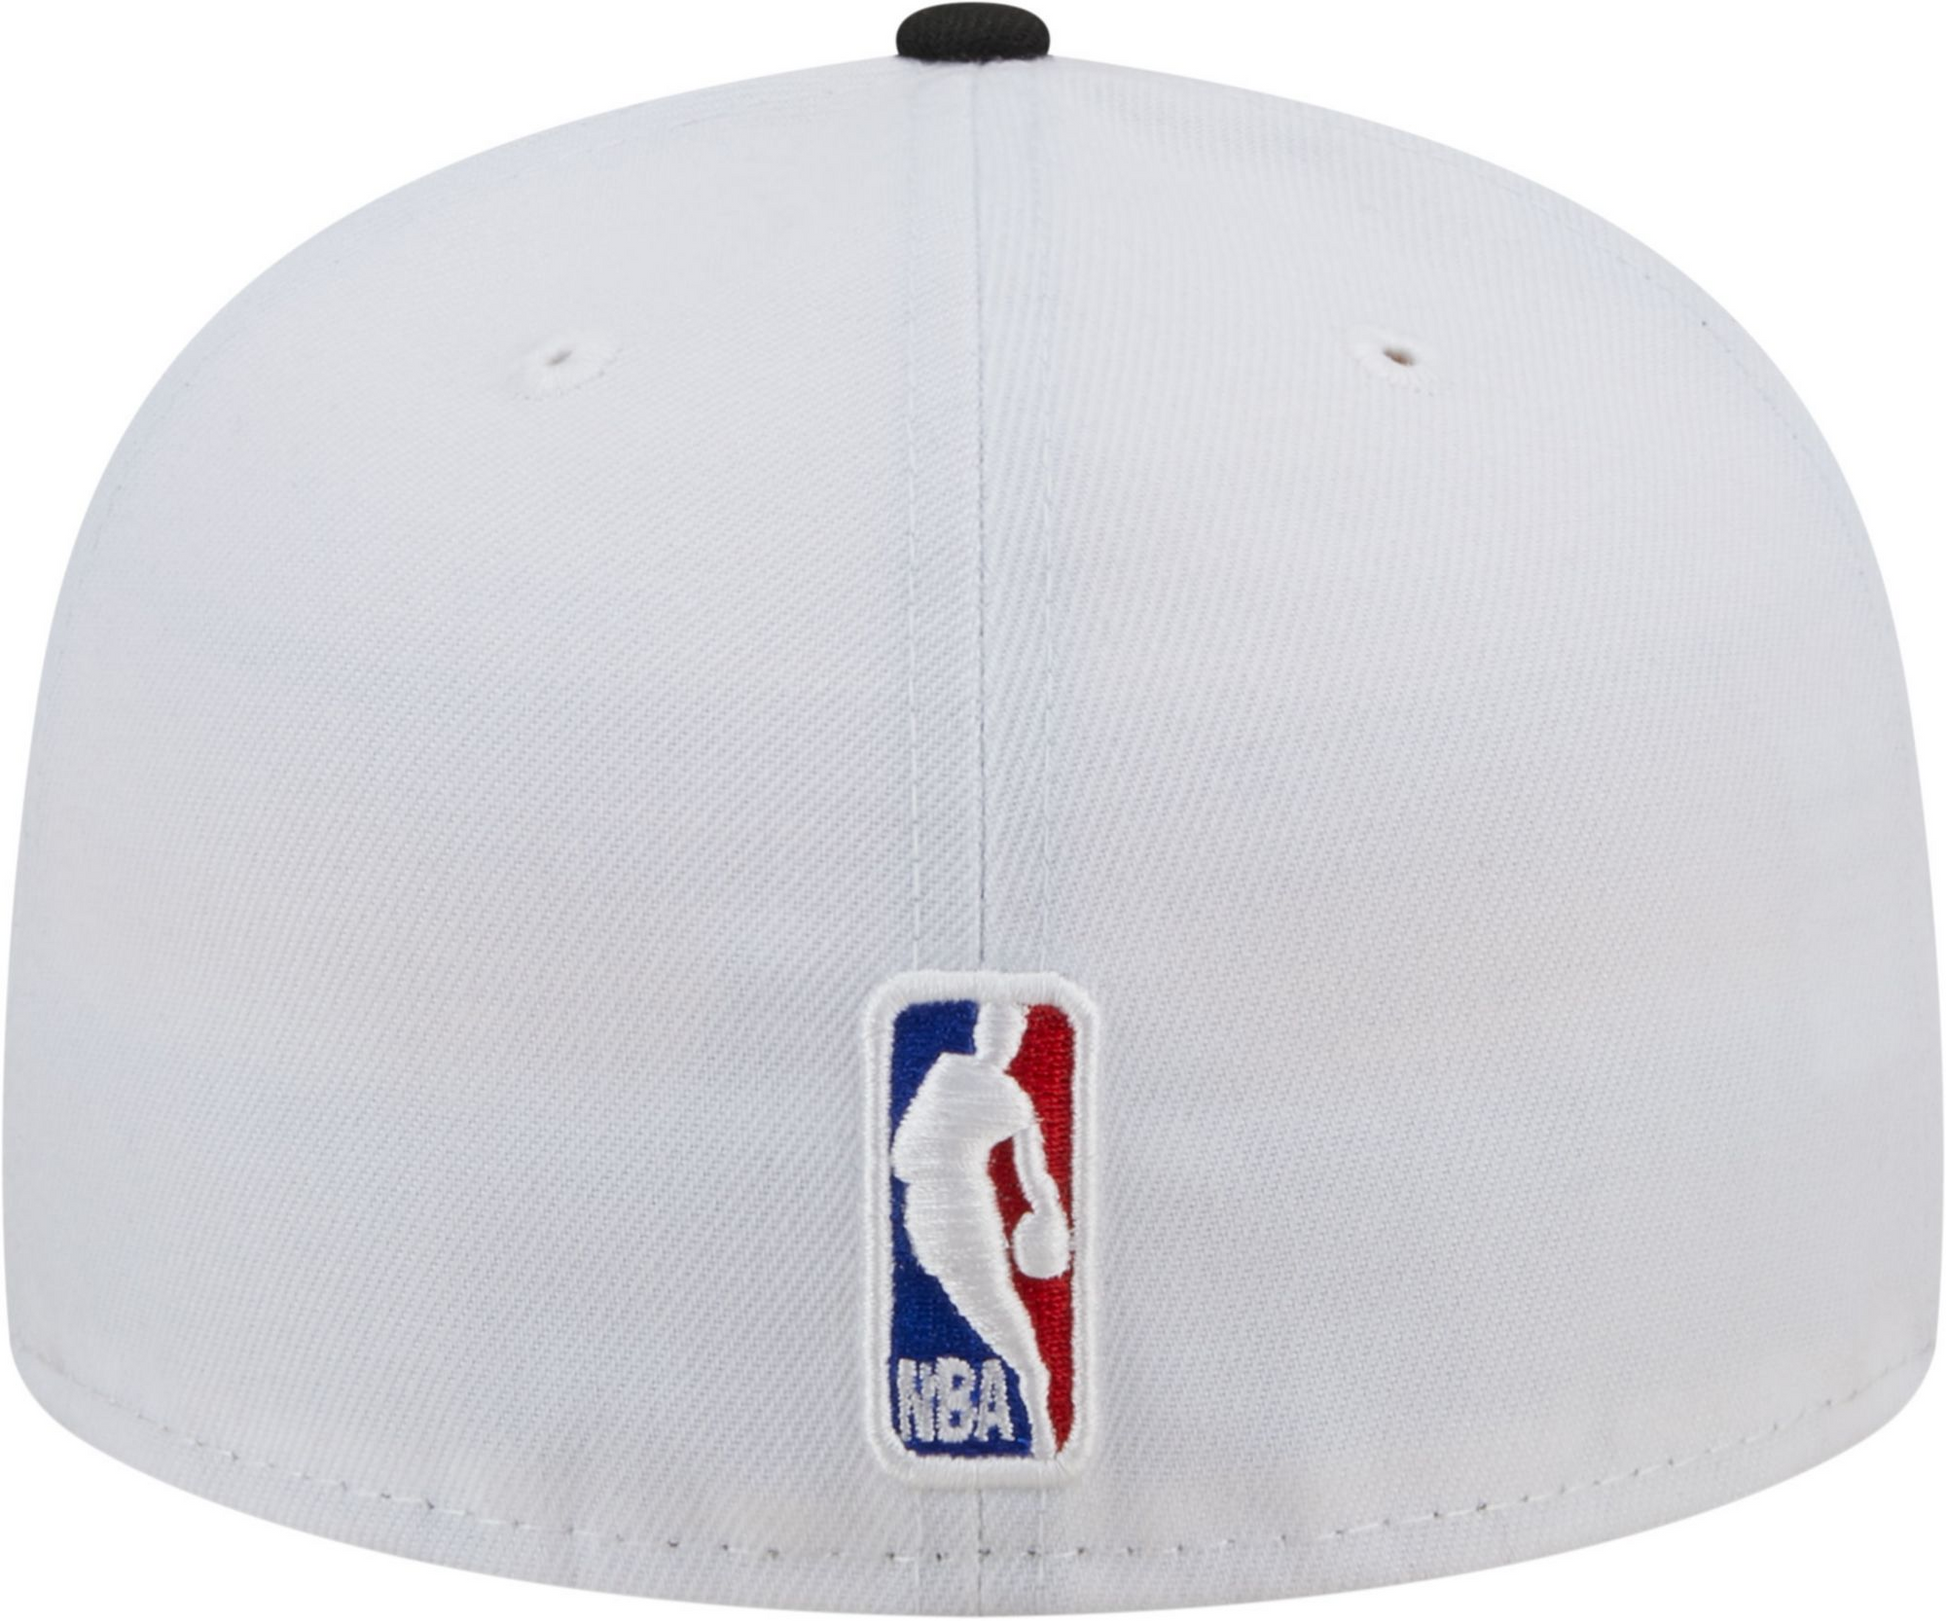 New Era Miami Heat Vice Blue Edition 59Fifty Fitted Cap, EXCLUSIVE HATS, CAPS